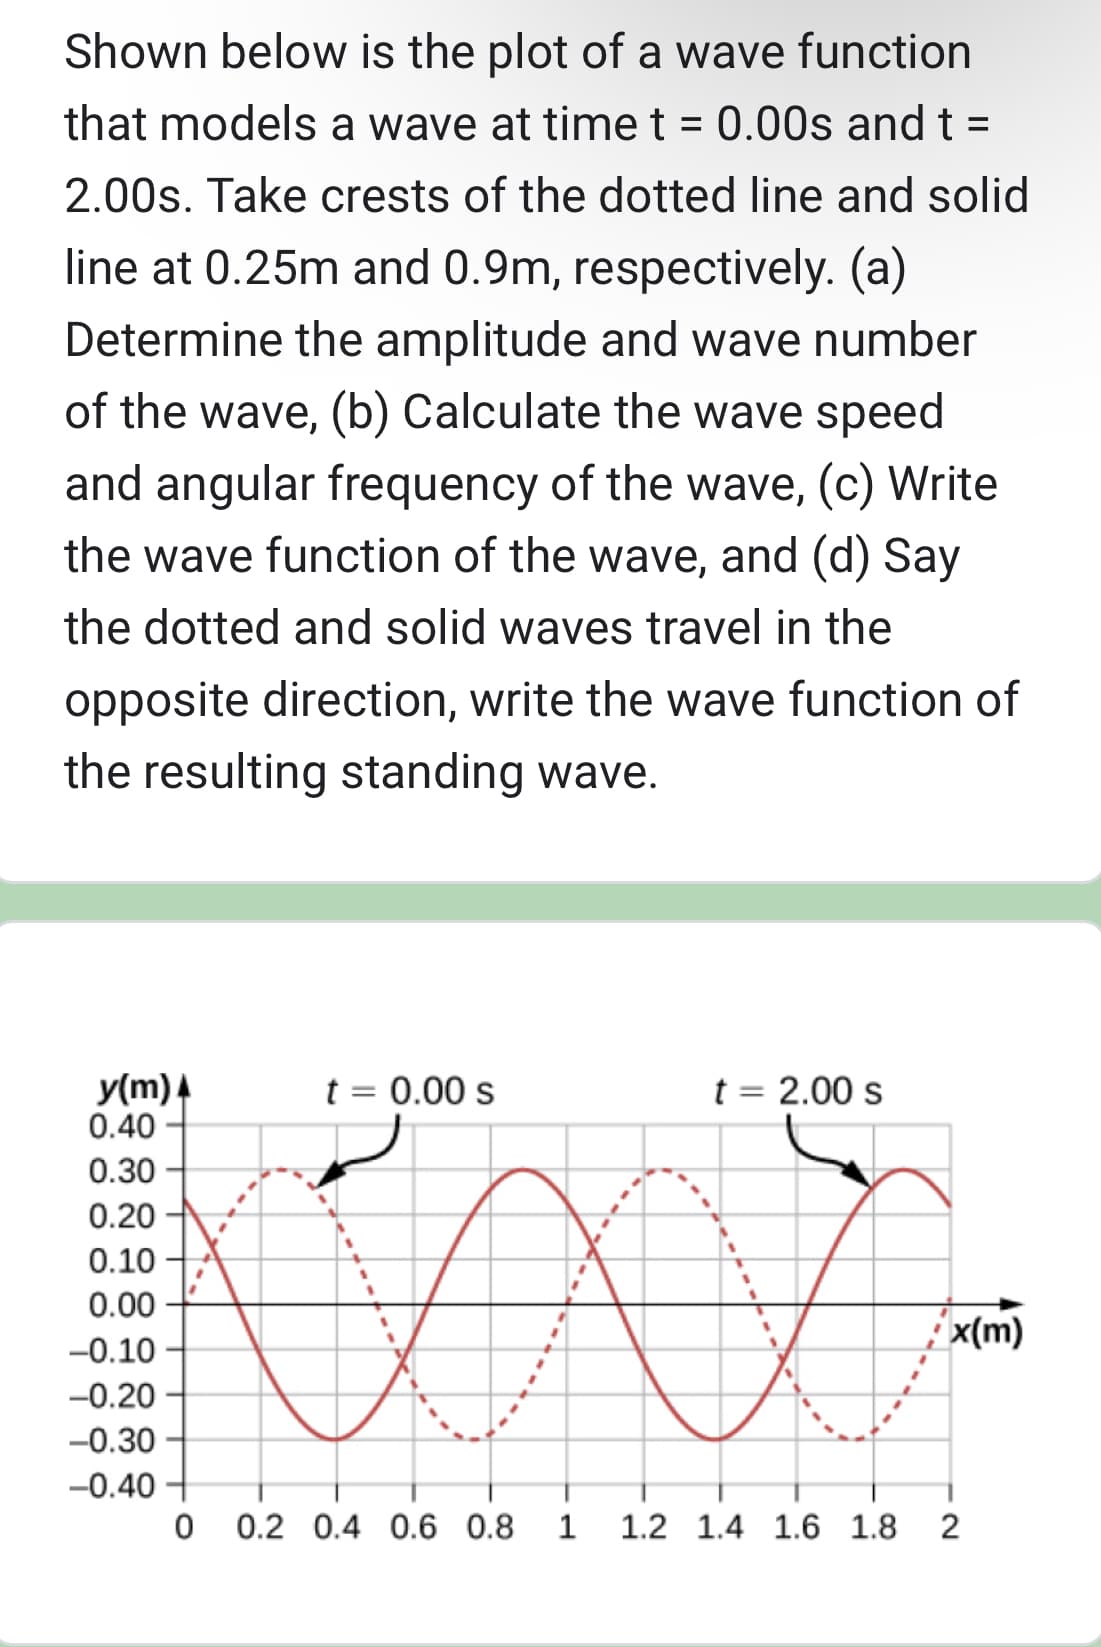 Shown below is the plot of a wave function
that models a wave at time t = 0.00s and t =
2.00s. Take crests of the dotted line and solid
line at 0.25m and 0.9m, respectively. (a)
Determine the amplitude and wave number
of the wave, (b) Calculate the wave speed
and angular frequency of the wave, (c) Write
the wave function of the wave, and (d) Say
the dotted and solid waves travel in the
opposite direction, write the wave function of
the resulting standing wave.
y(m) 4
0.40
0.30
0.20
0.10
0.00
-0.10
-0.20
-0.30
-0.40
t = 0.00 s
KXX
0 0.2 0.4 0.6 0.8 1
t = 2.00 s
x(m)
1
1.2 1.4 1.6 1.8 2